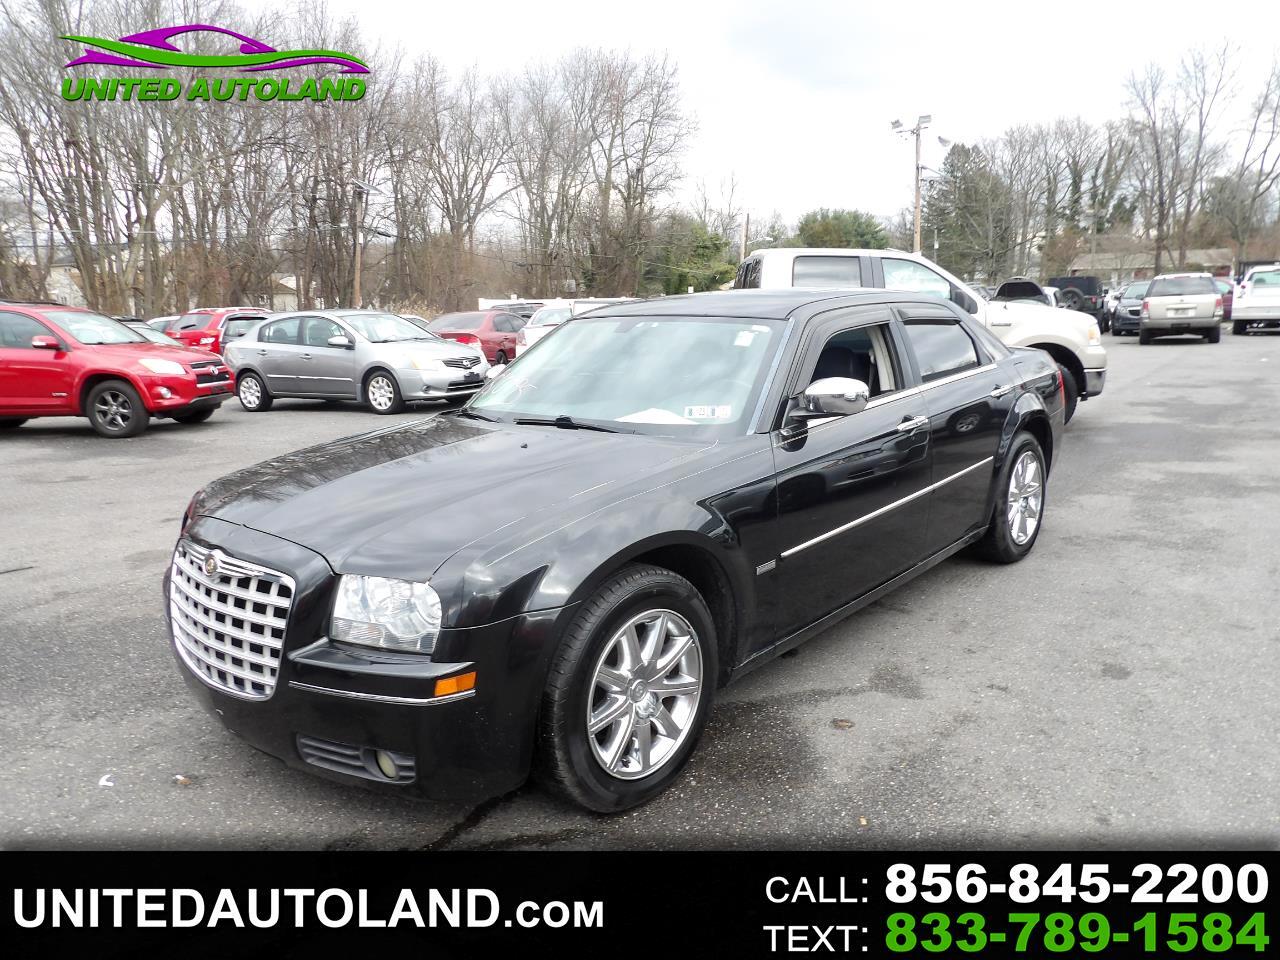 Chrysler 300 4dr Sdn Touring Signature RWD 2010